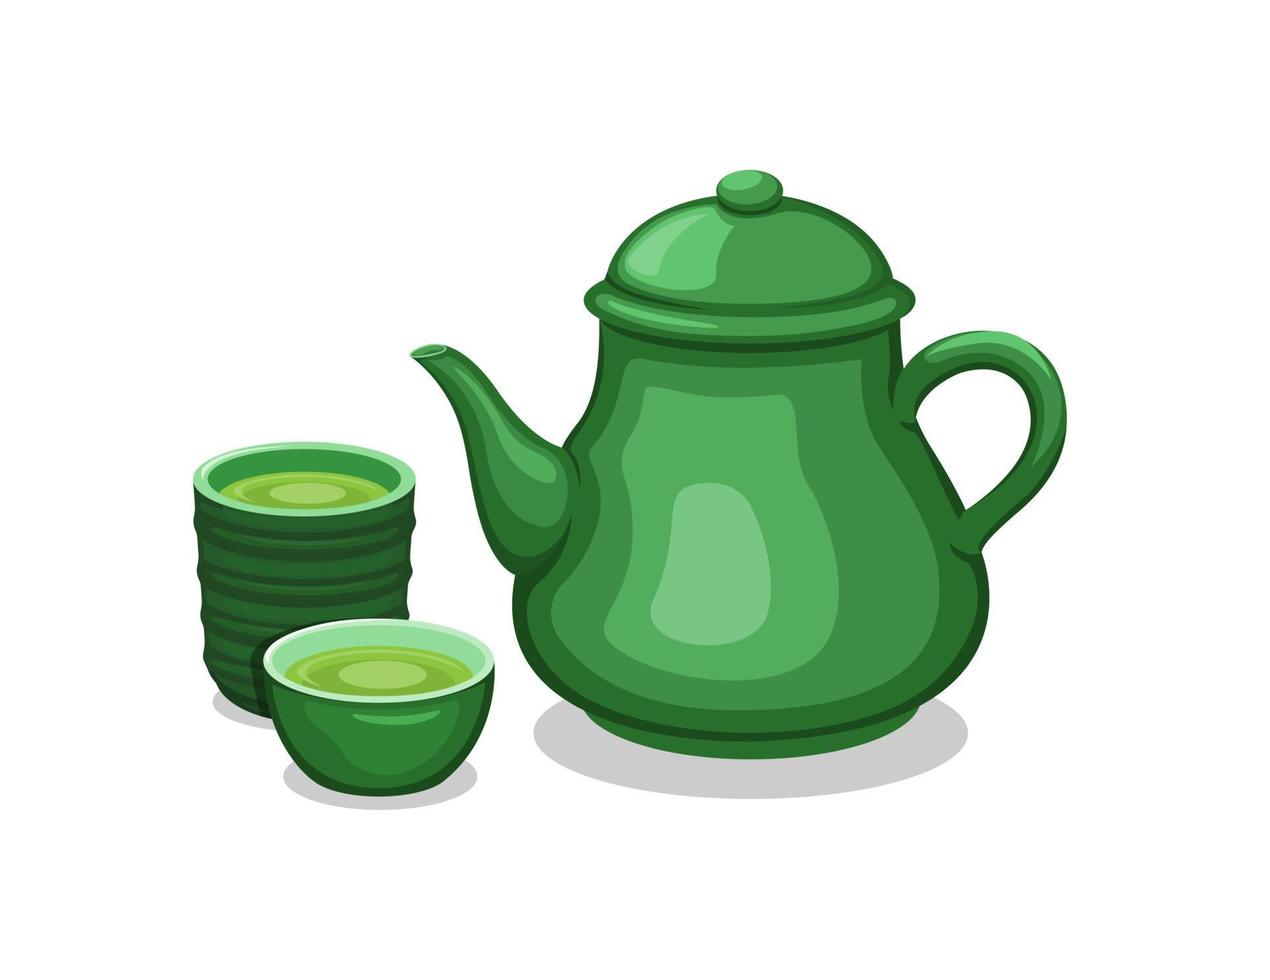 ATea on teapot and cup asian traditional healthy drink object set illustration vector